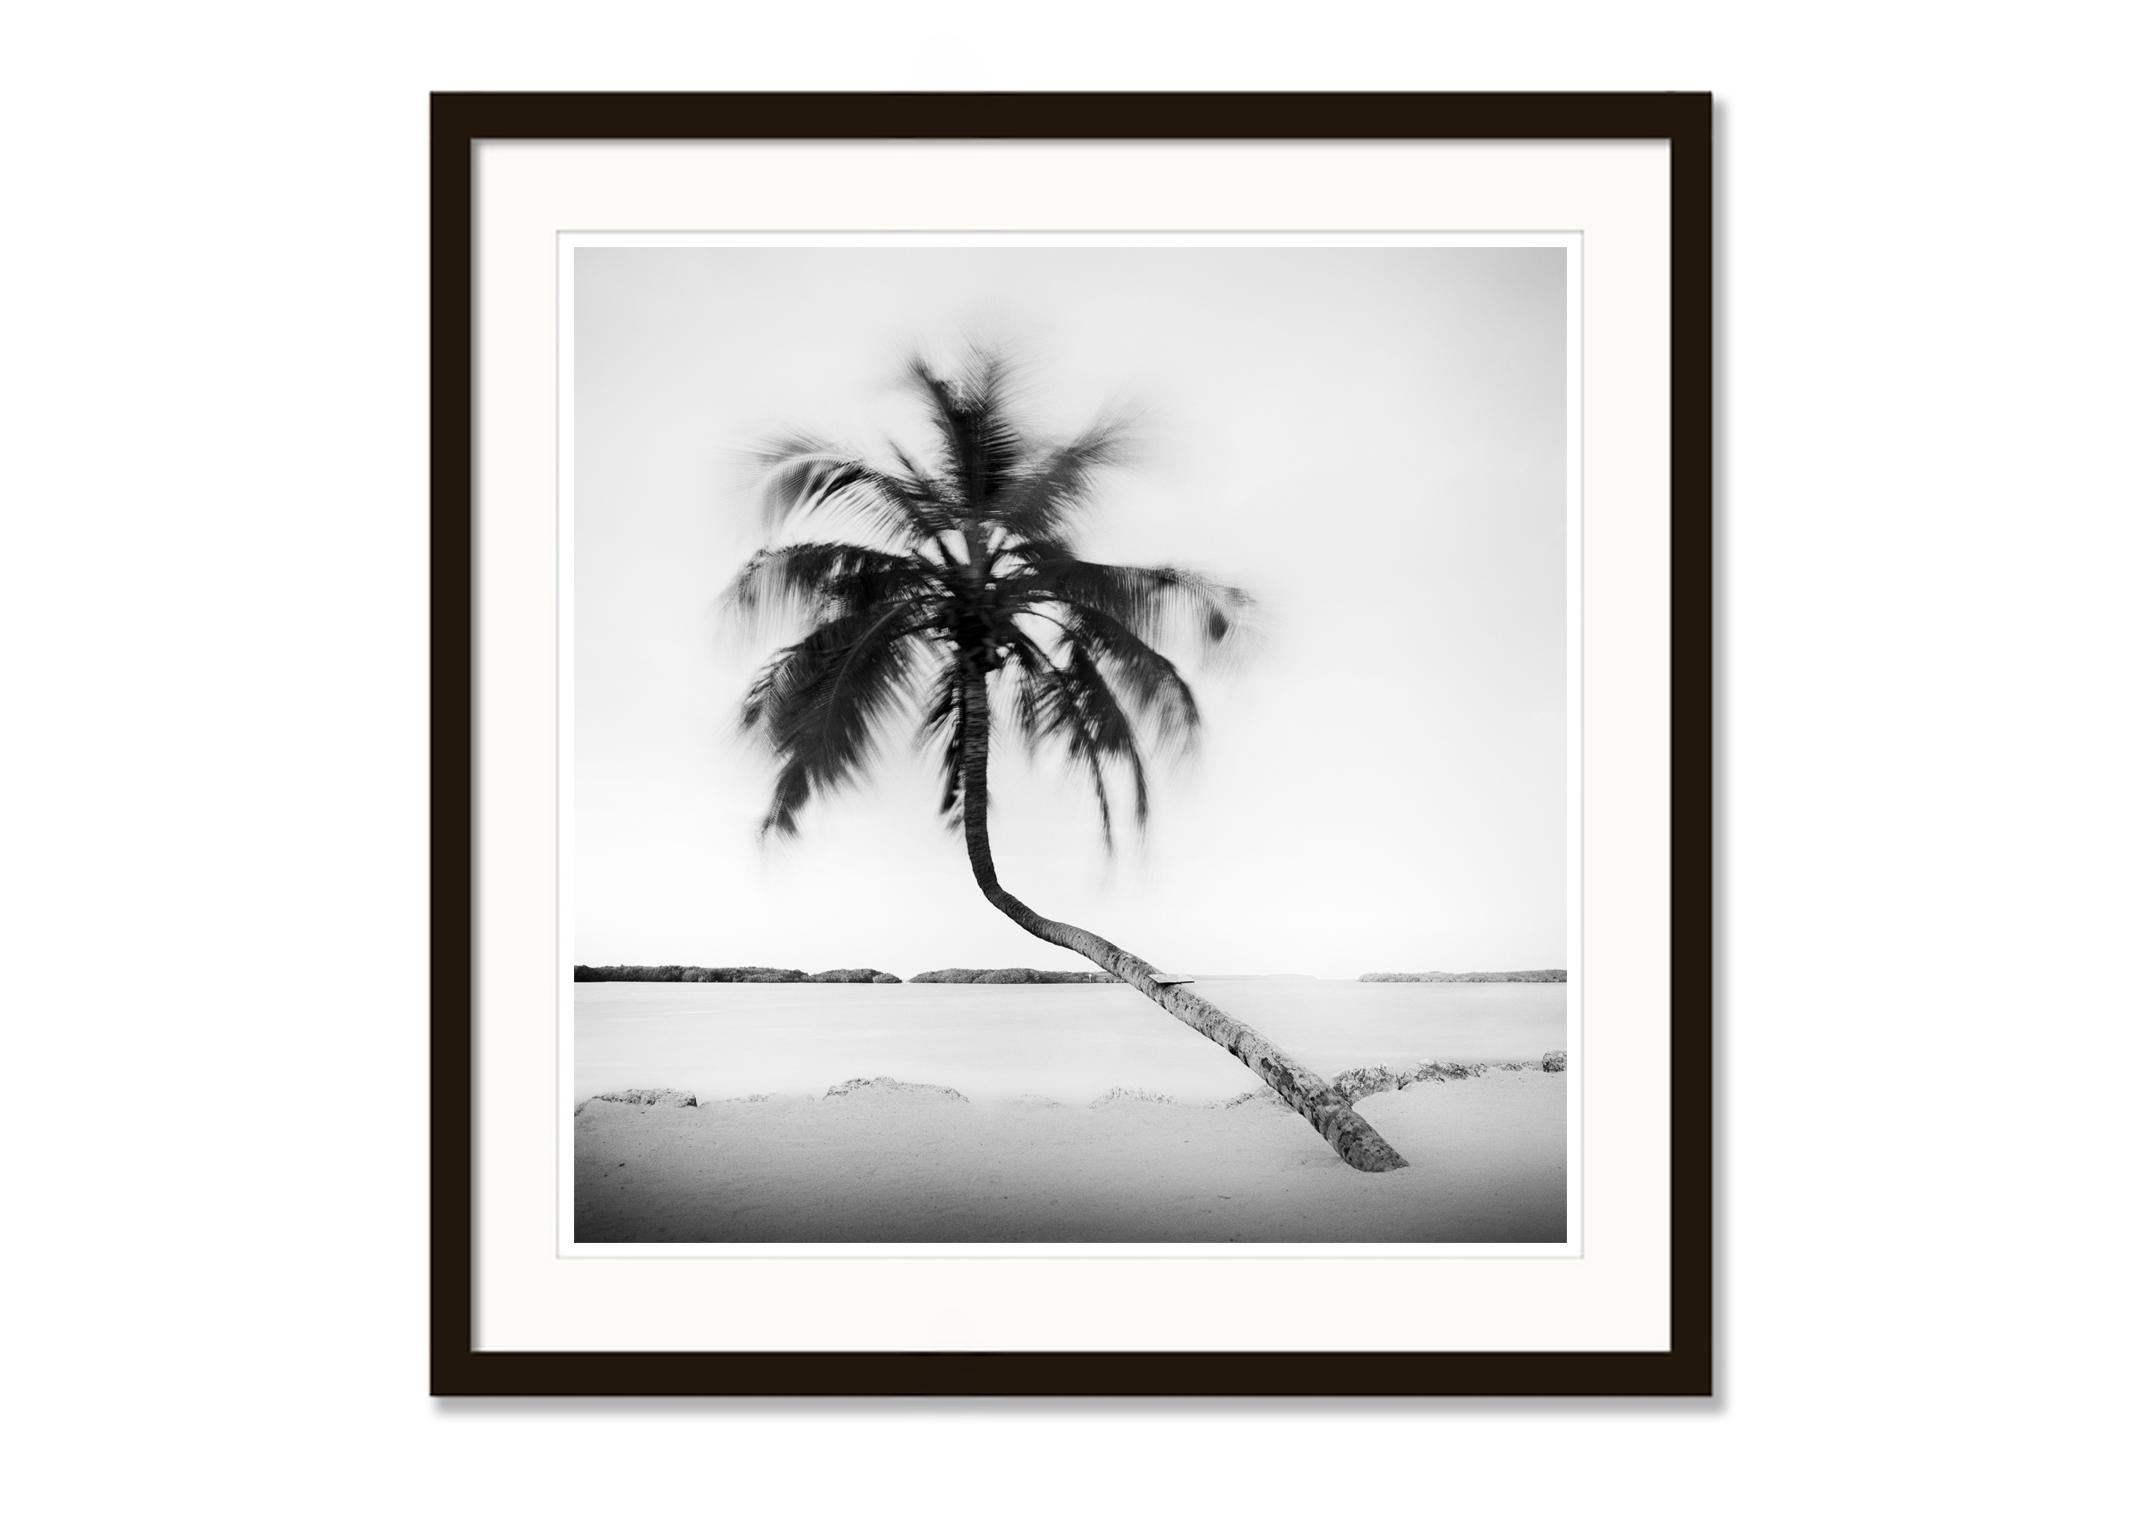 SILVERFINEART - Black and white landscape photography. Limited edition of 9. Produced from the original 6x6cm medium format black and white negative film and printed as archival pigment ink print on fine art paper. Hand signed, titled, negative